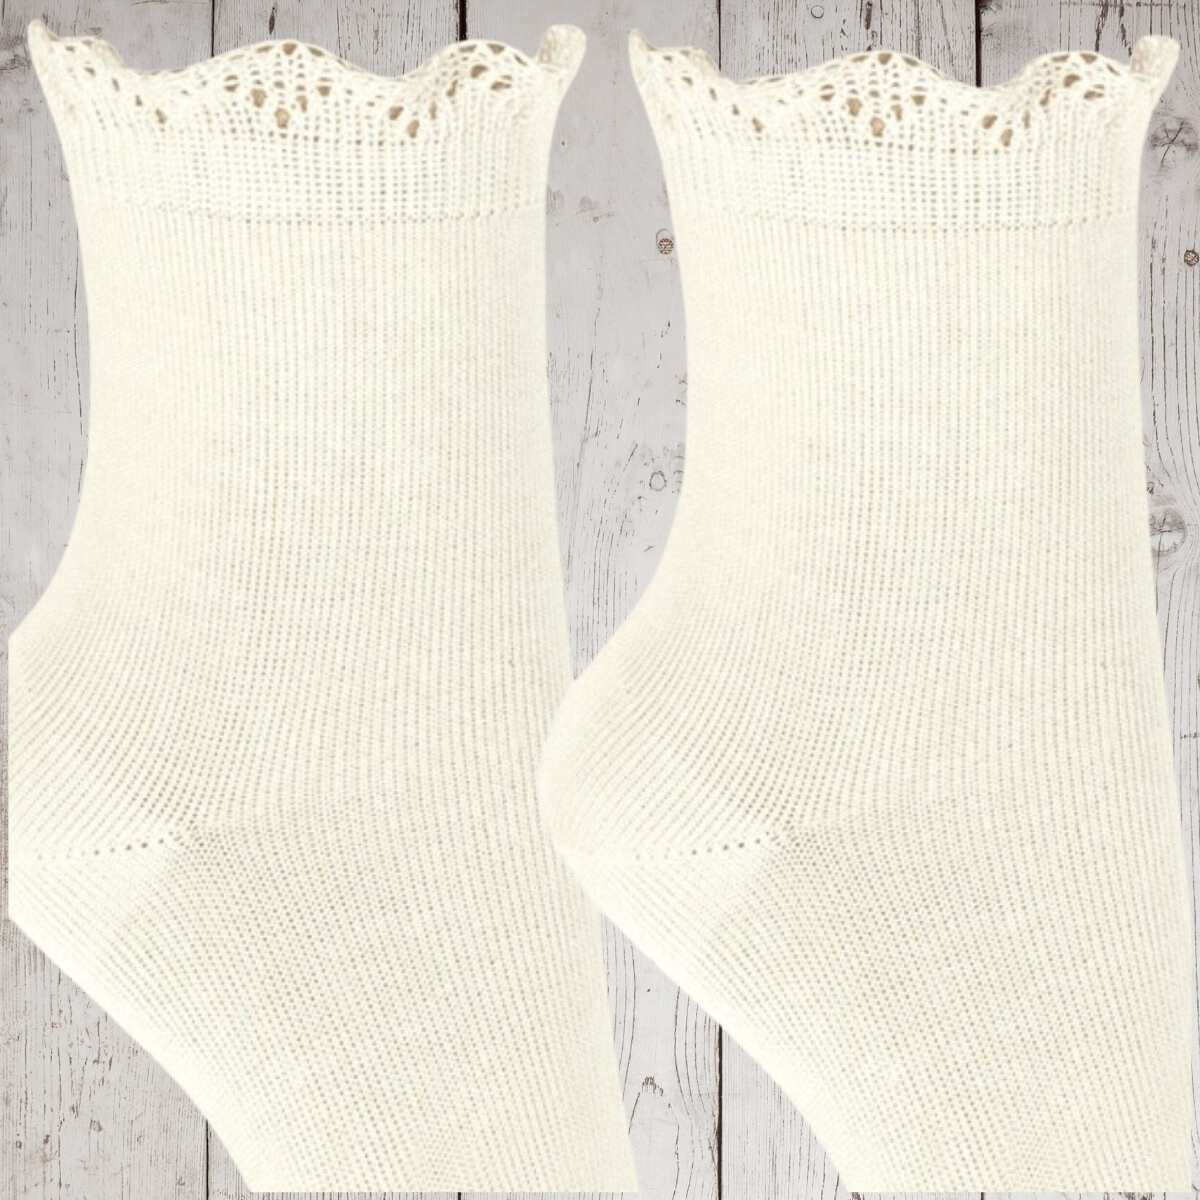 CEREMONY SOCKS WITH PATTERNED CUFF CONDOR - 4